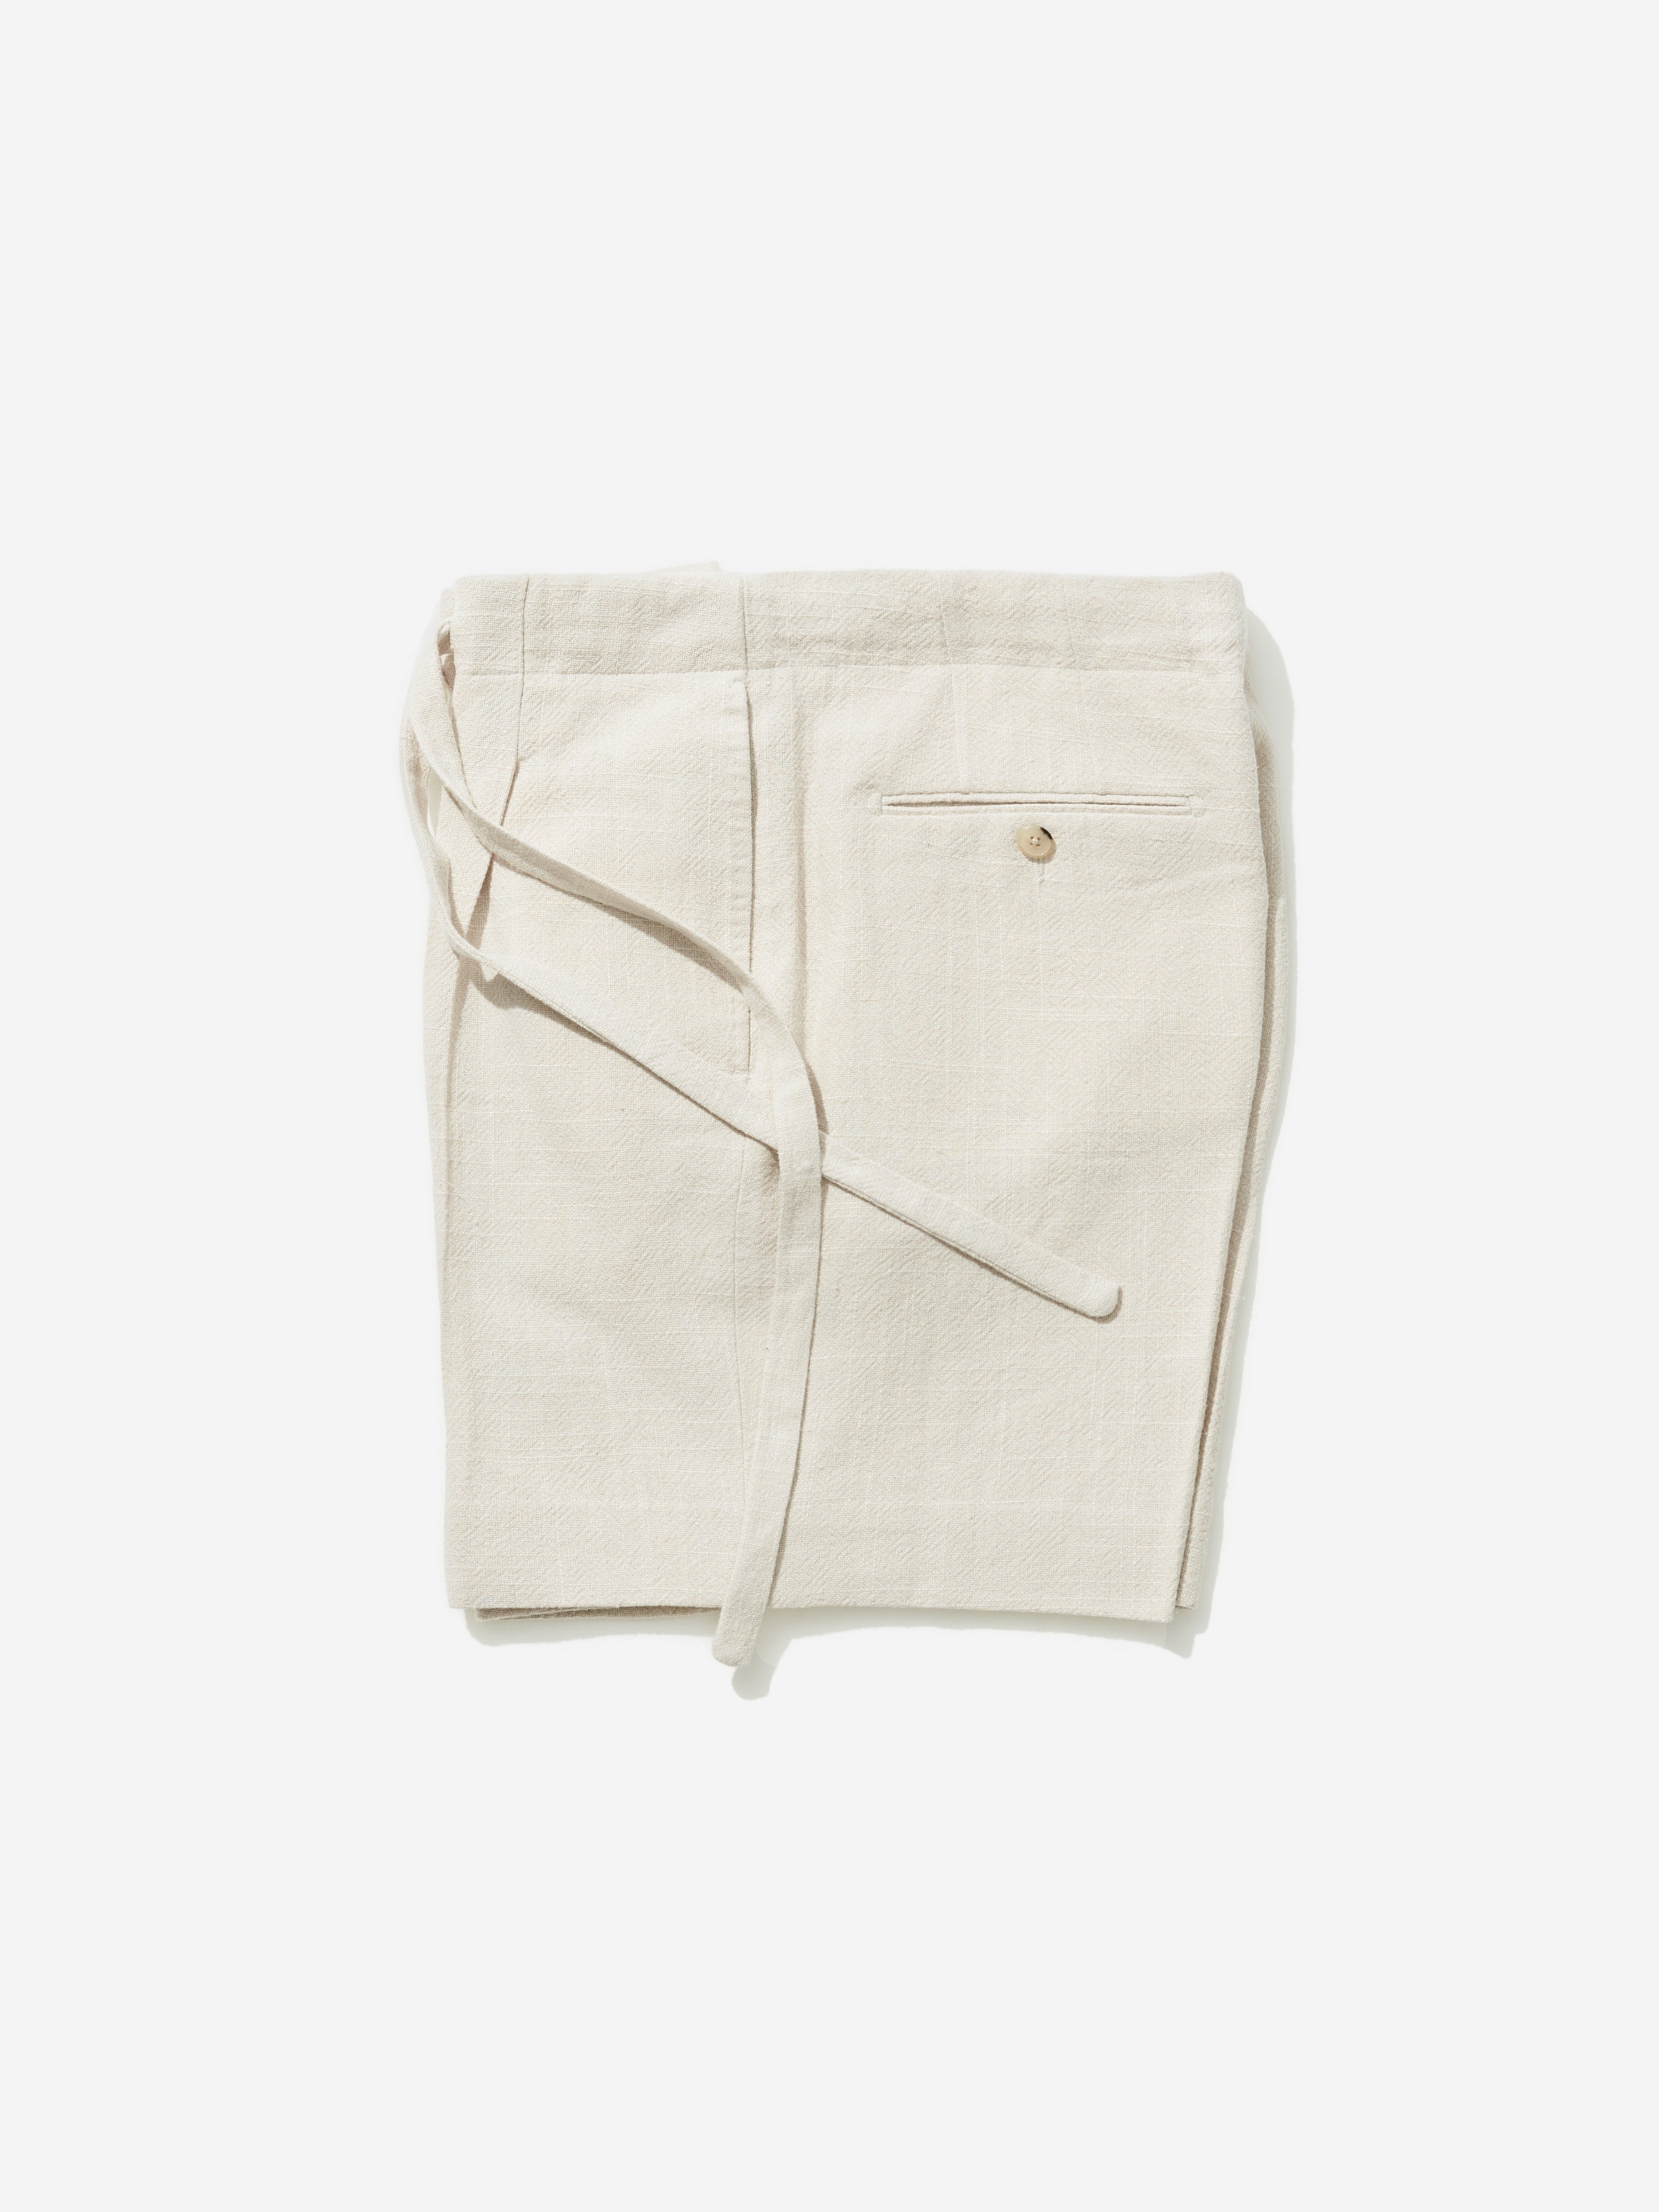 Cream Stonewashed Linen Drawstring Shorts (Wide Fit) - Grand Le Mar